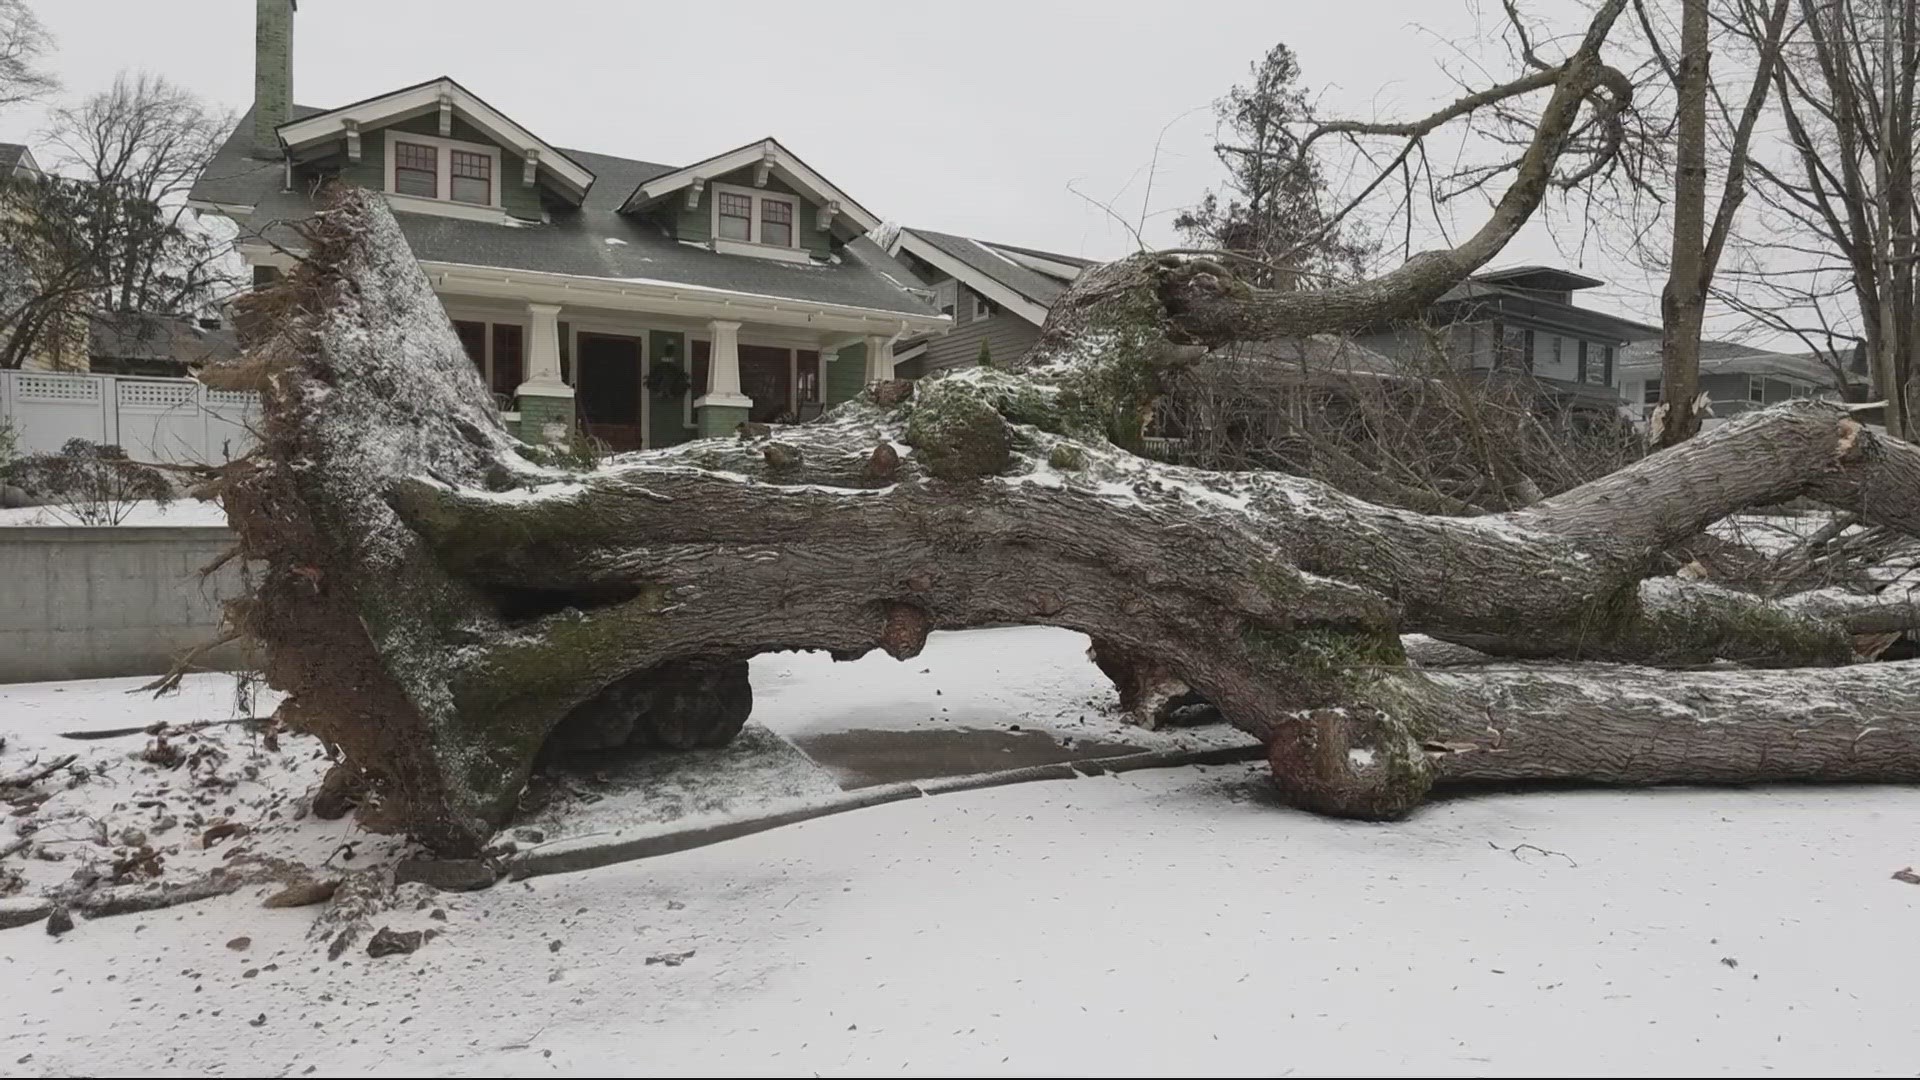 Downed trees have wreaked havoc on power lines, roads, vehicles and many homes amid strong, cold winds and precipitation.